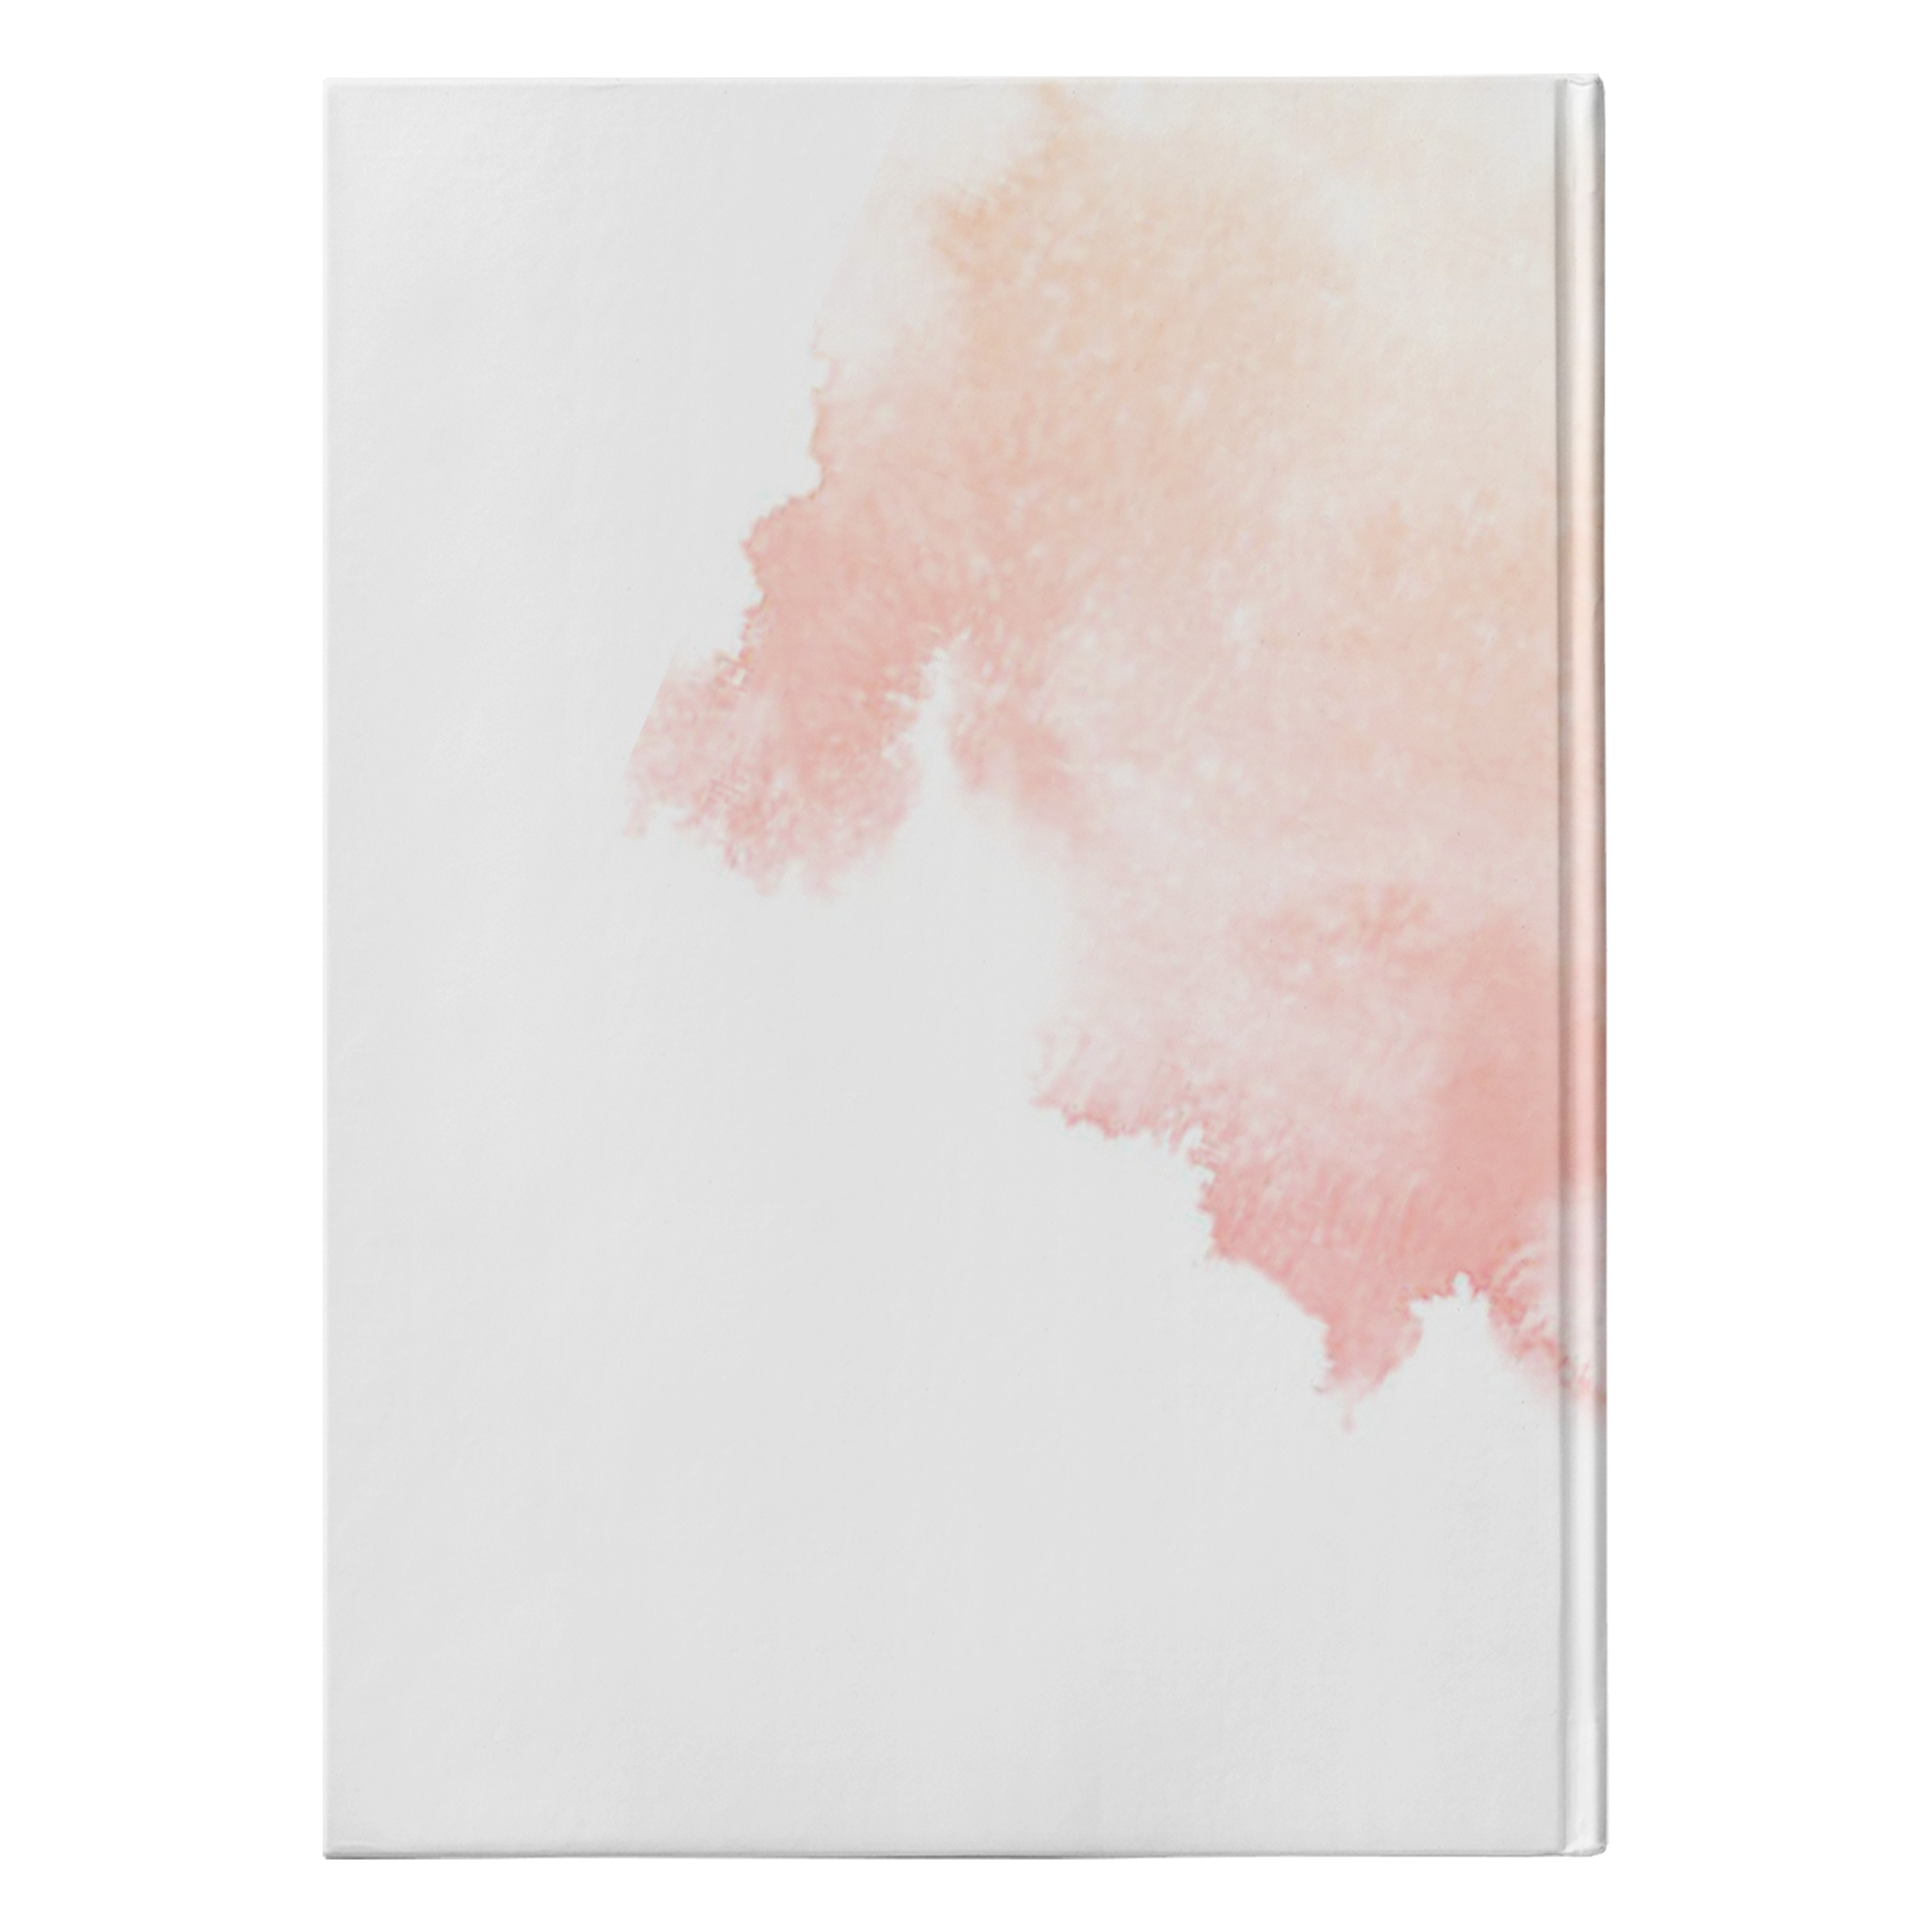 Make Your Dreams A Reality Journal